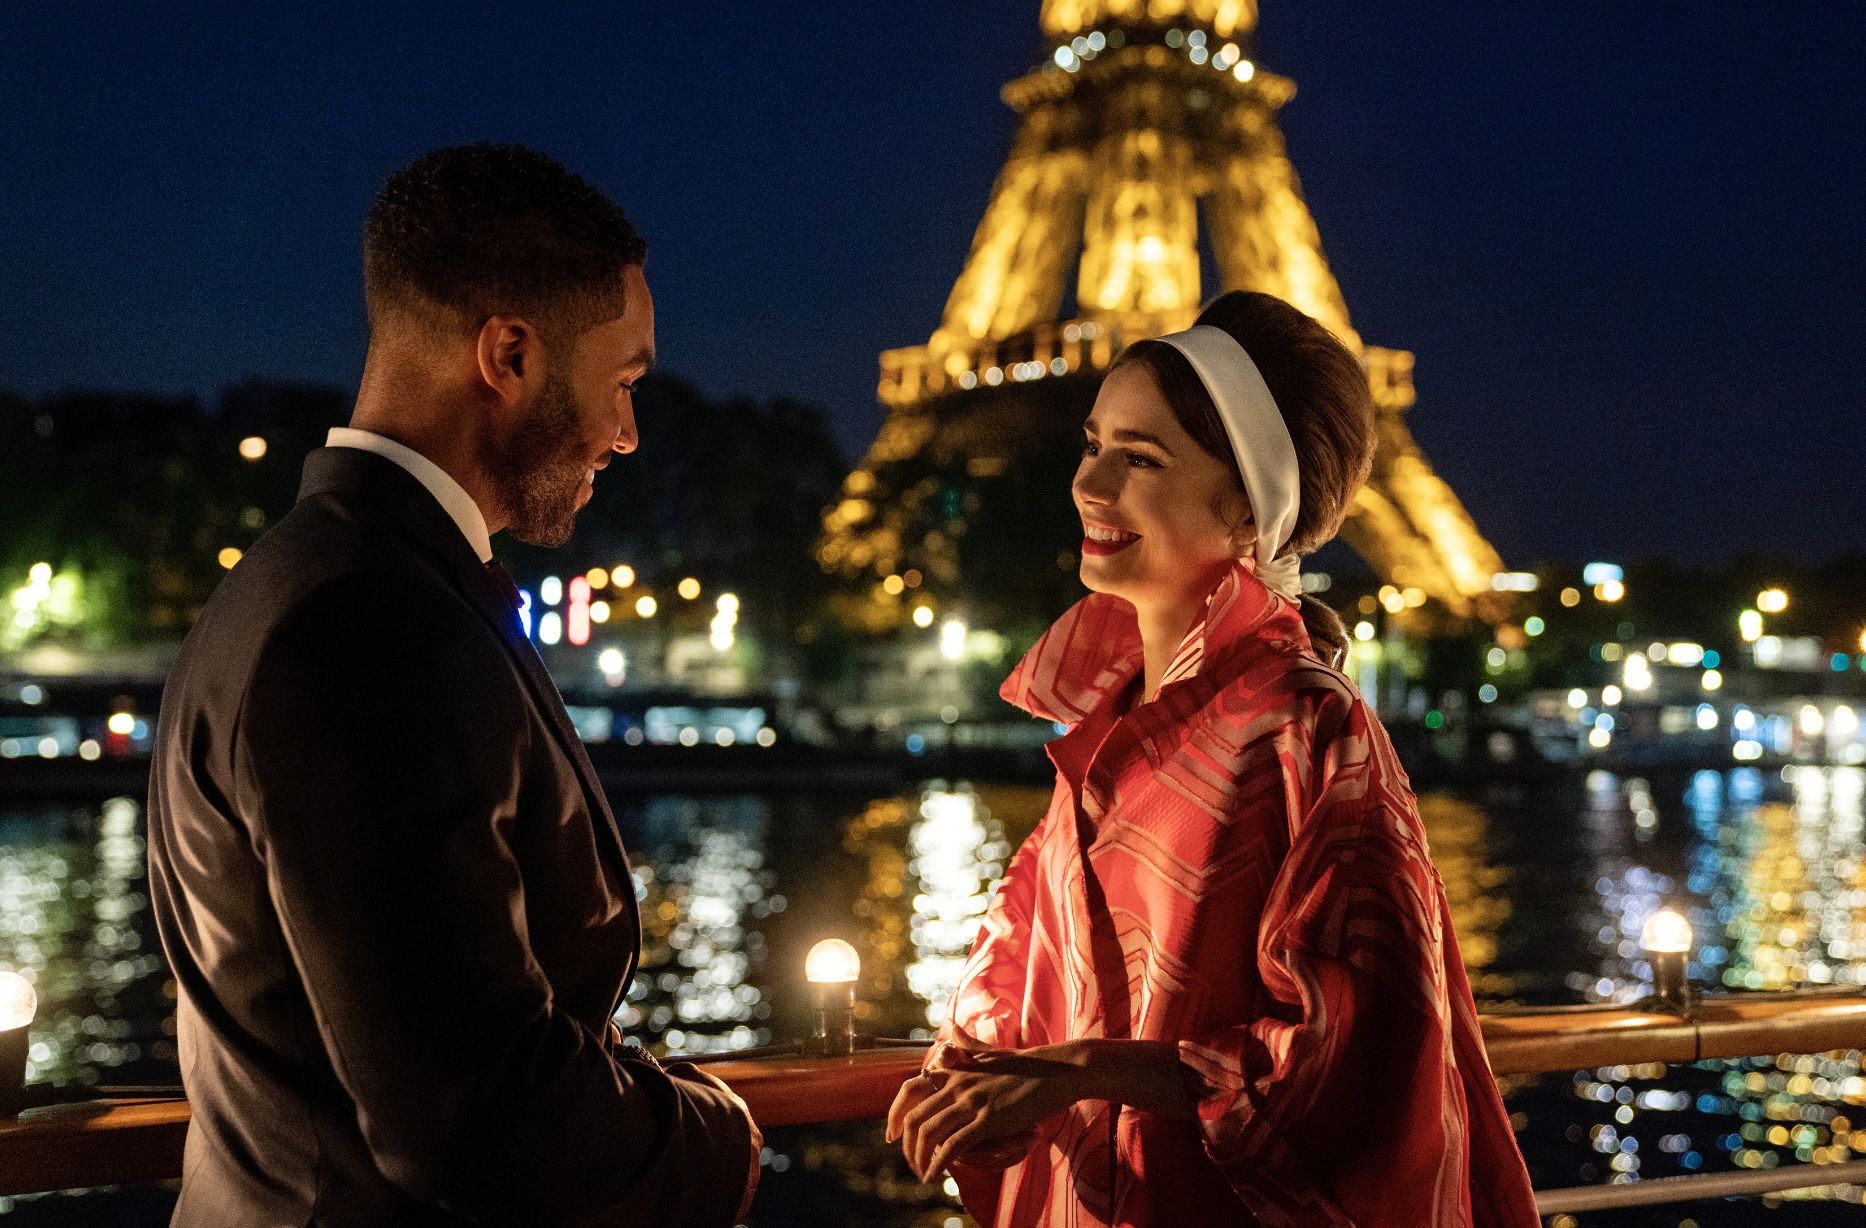 Emily In Paris Season 3 Cast, Release Date, Plot and More - Parade